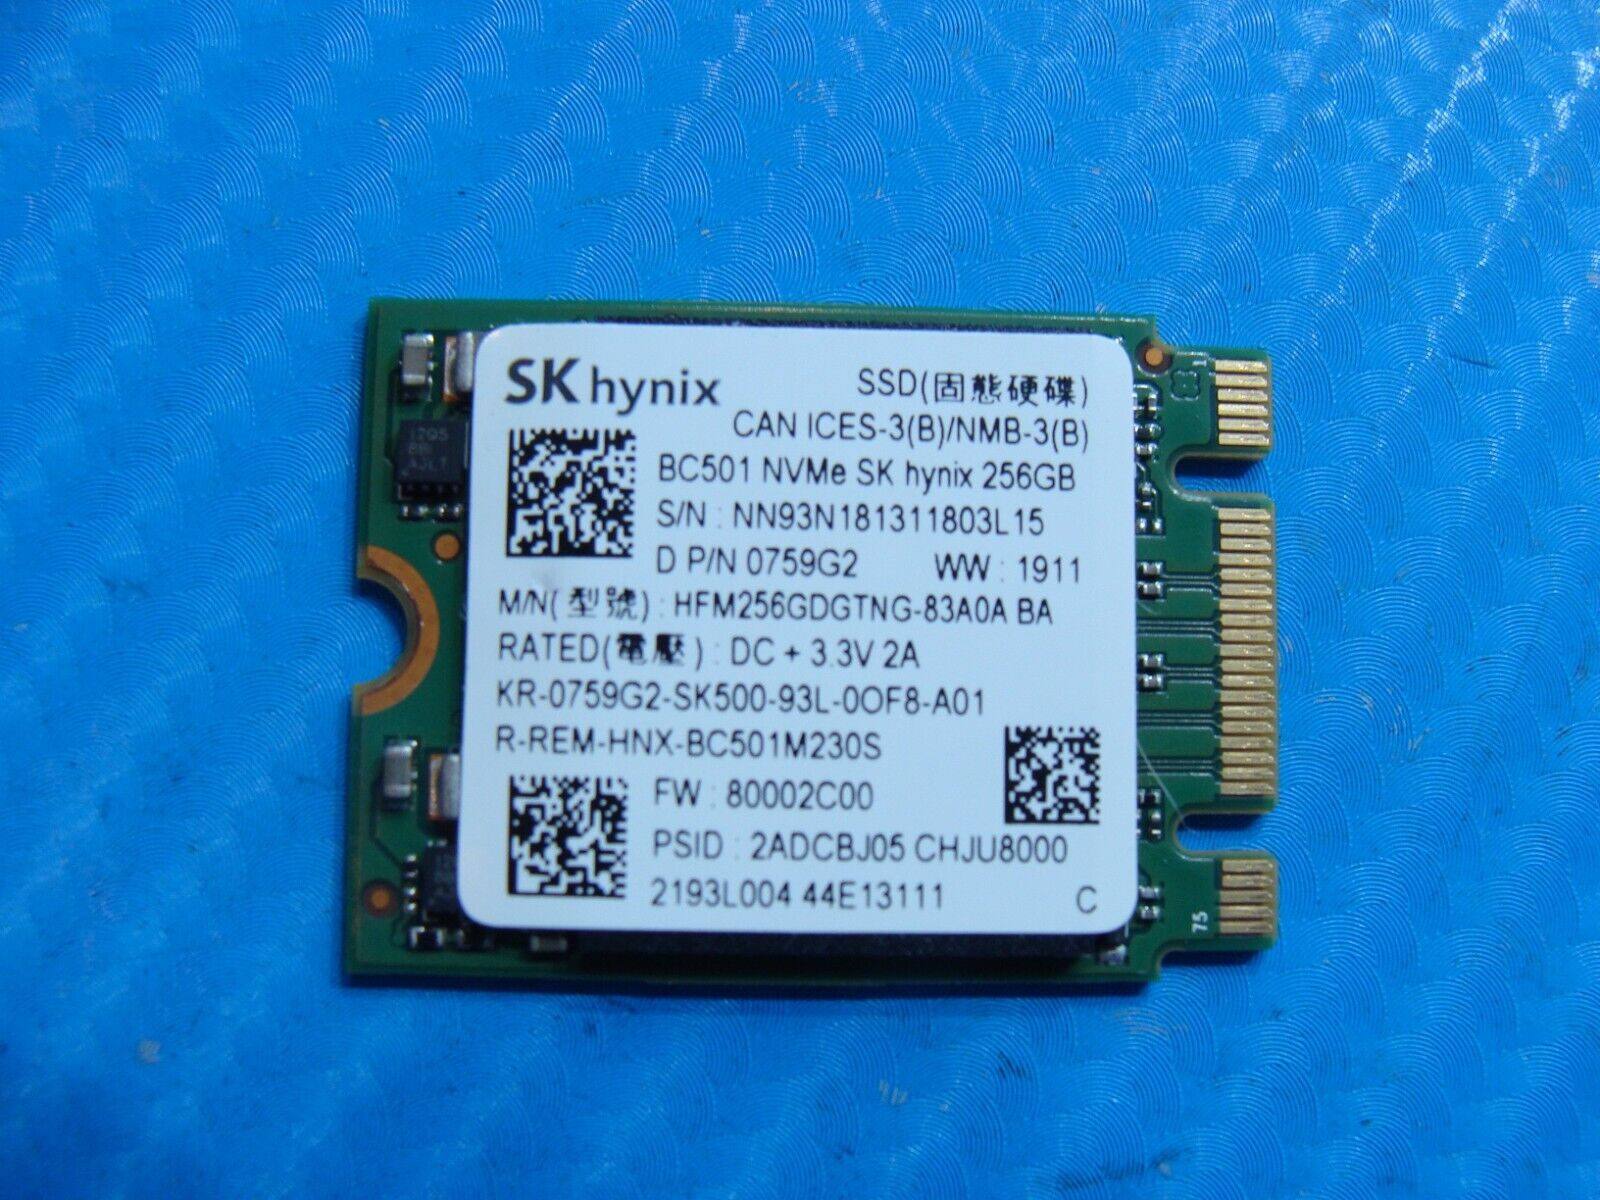 Dell 7386 SK Hynix 256GB NVMe M.2 SSD Solid State Drive 759G2 HFM256GDGTNG-83A0A